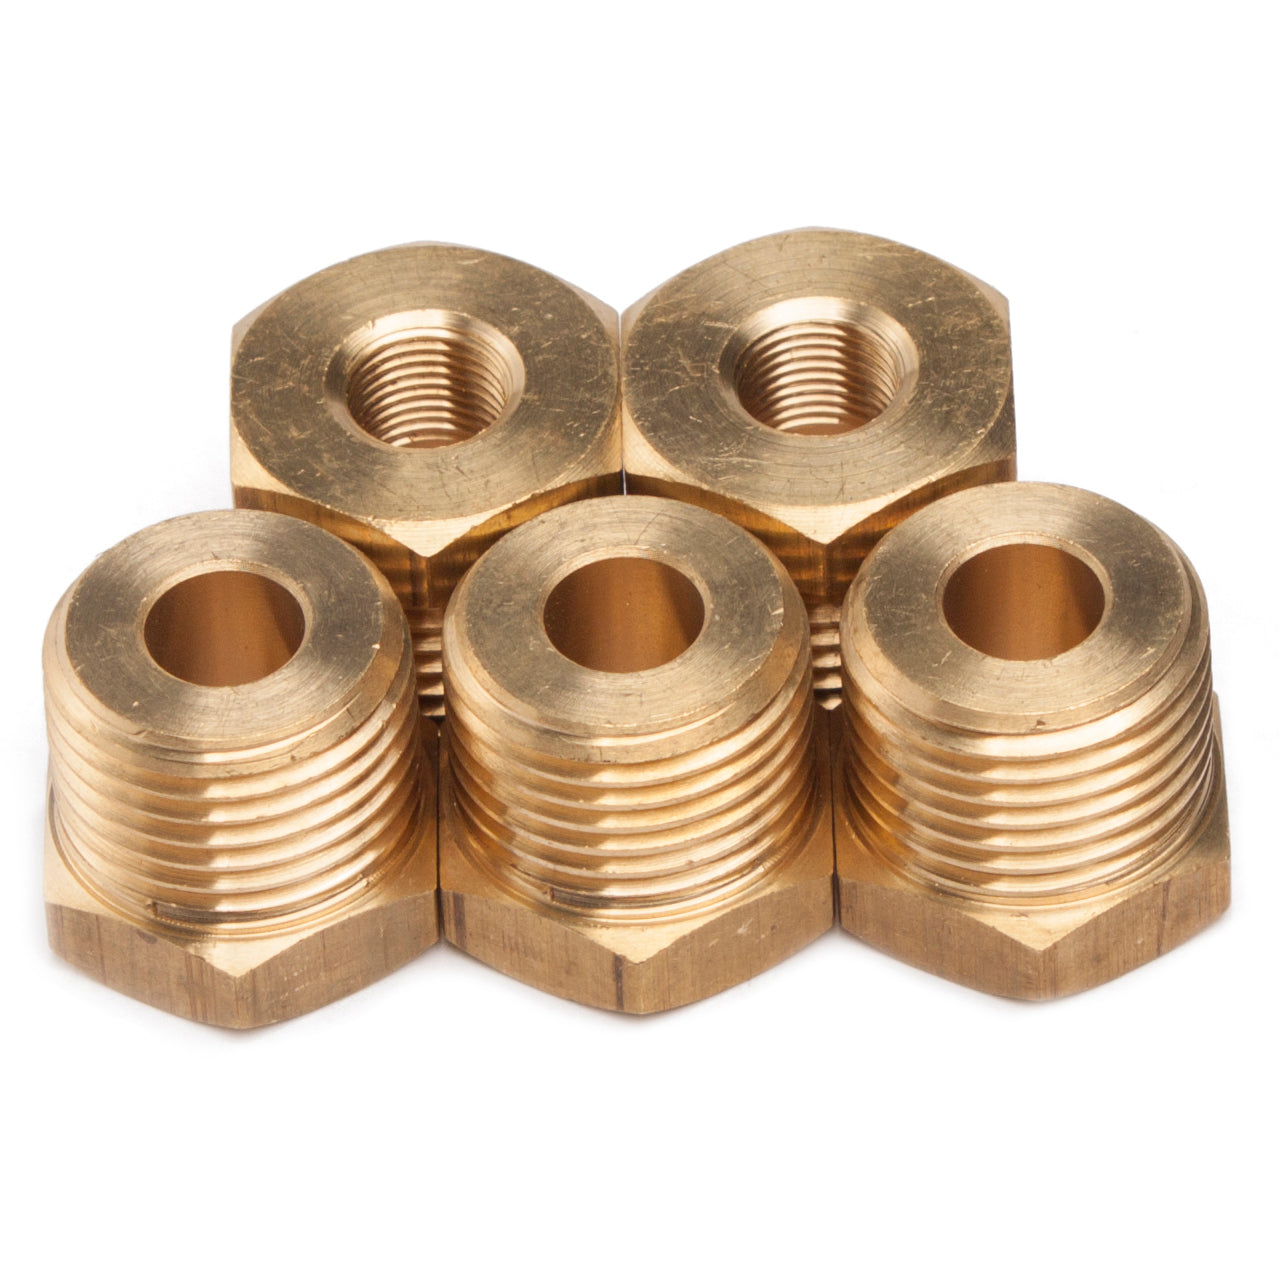 LTWFITTING Brass Pipe Hex Bushing Reducer Fittings 1/2-Inch Male BSPT x 1/8-Inch Female BSPP (Pack of 5)